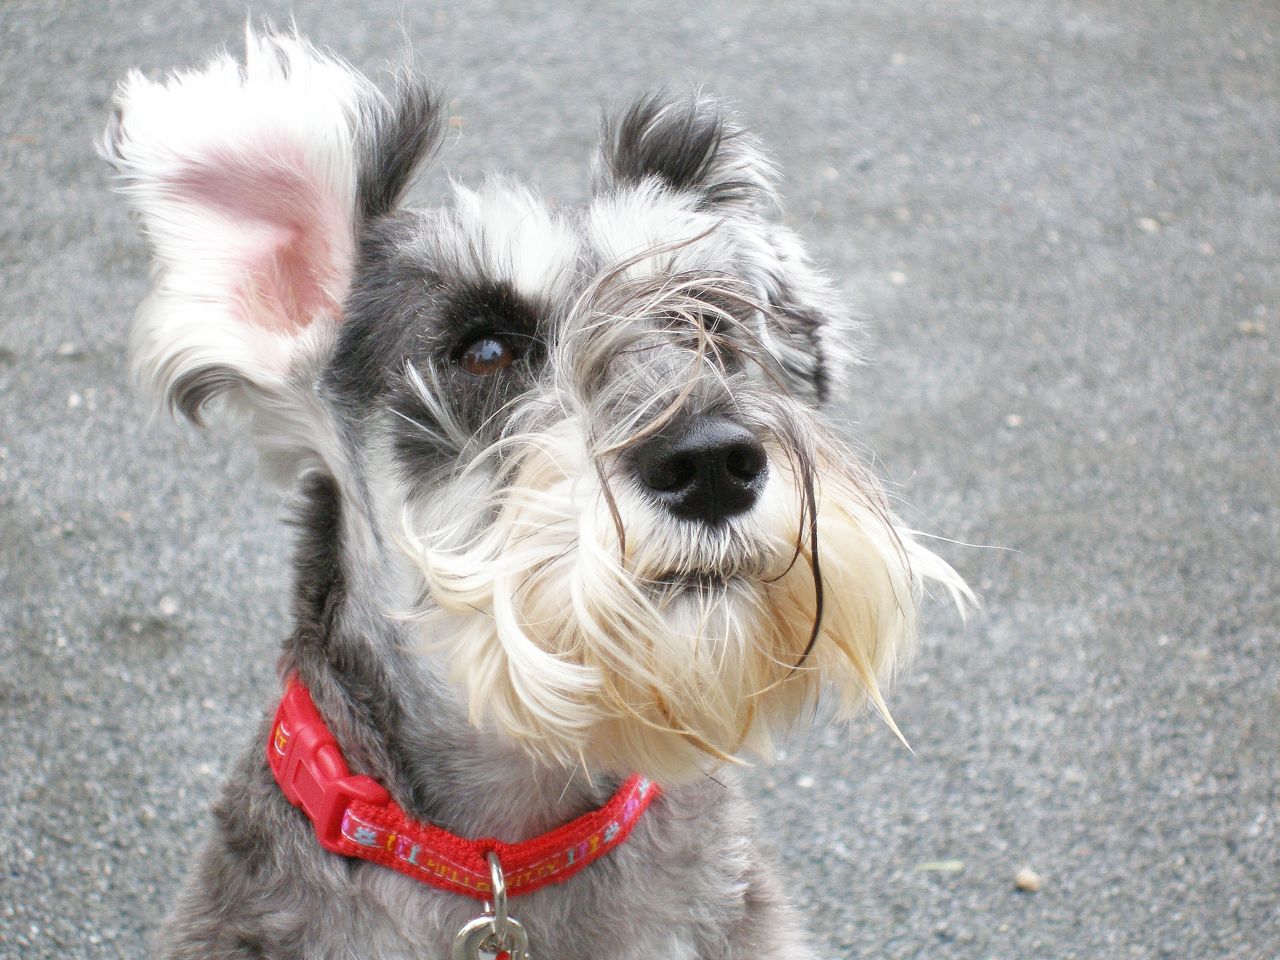 a small gray dog with a red collar is looking off to the side